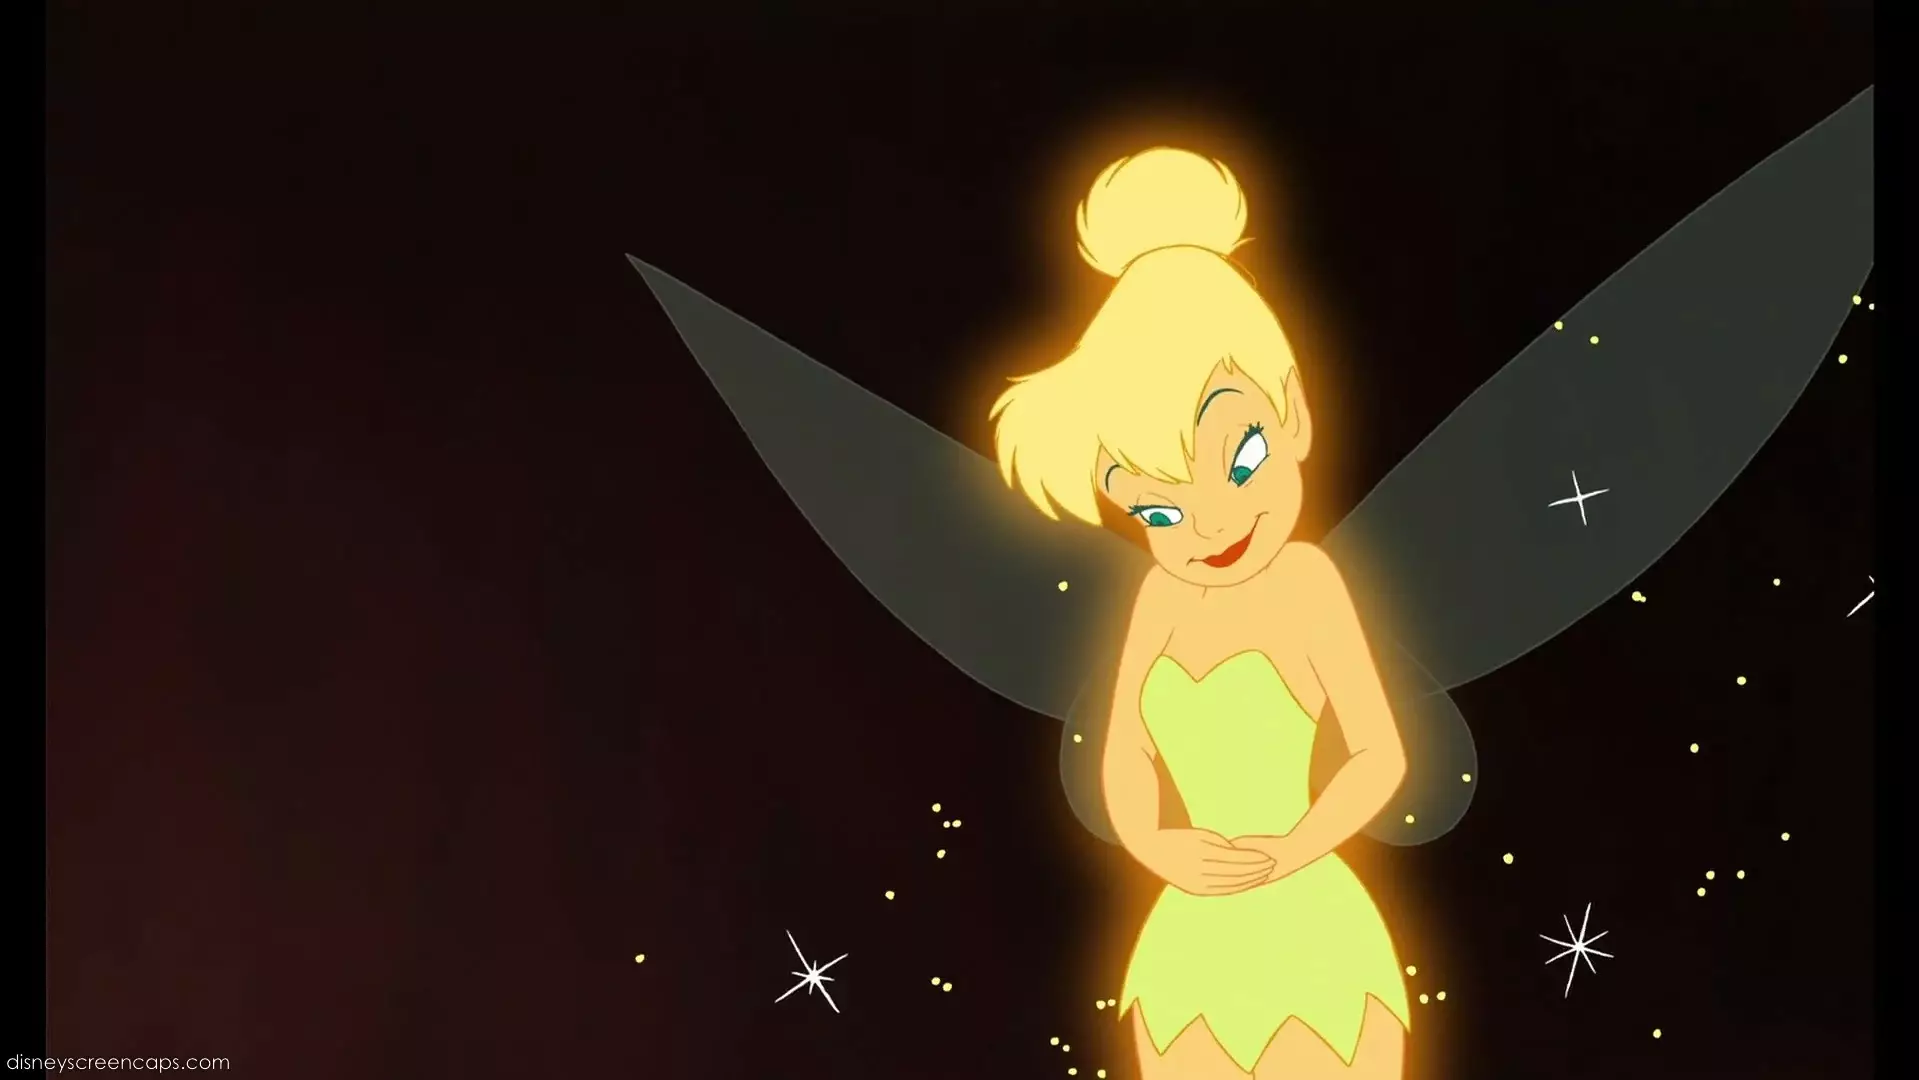 Disney Is Selling Tinkerbell Outfits For Your Dog